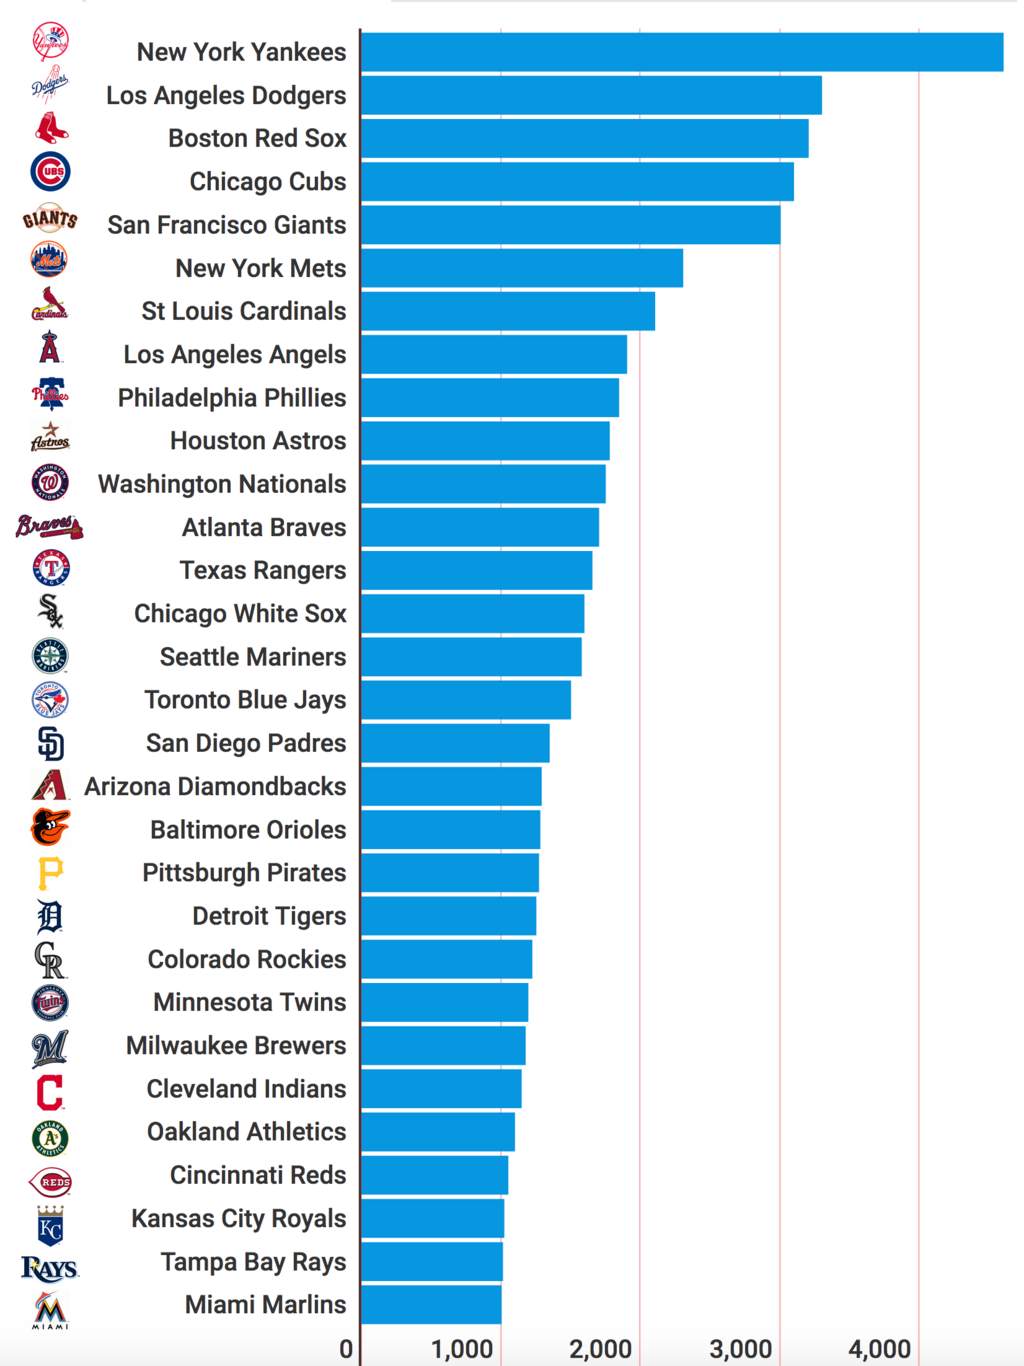 Washington Nationals on the Forbes MLB Team Valuations List